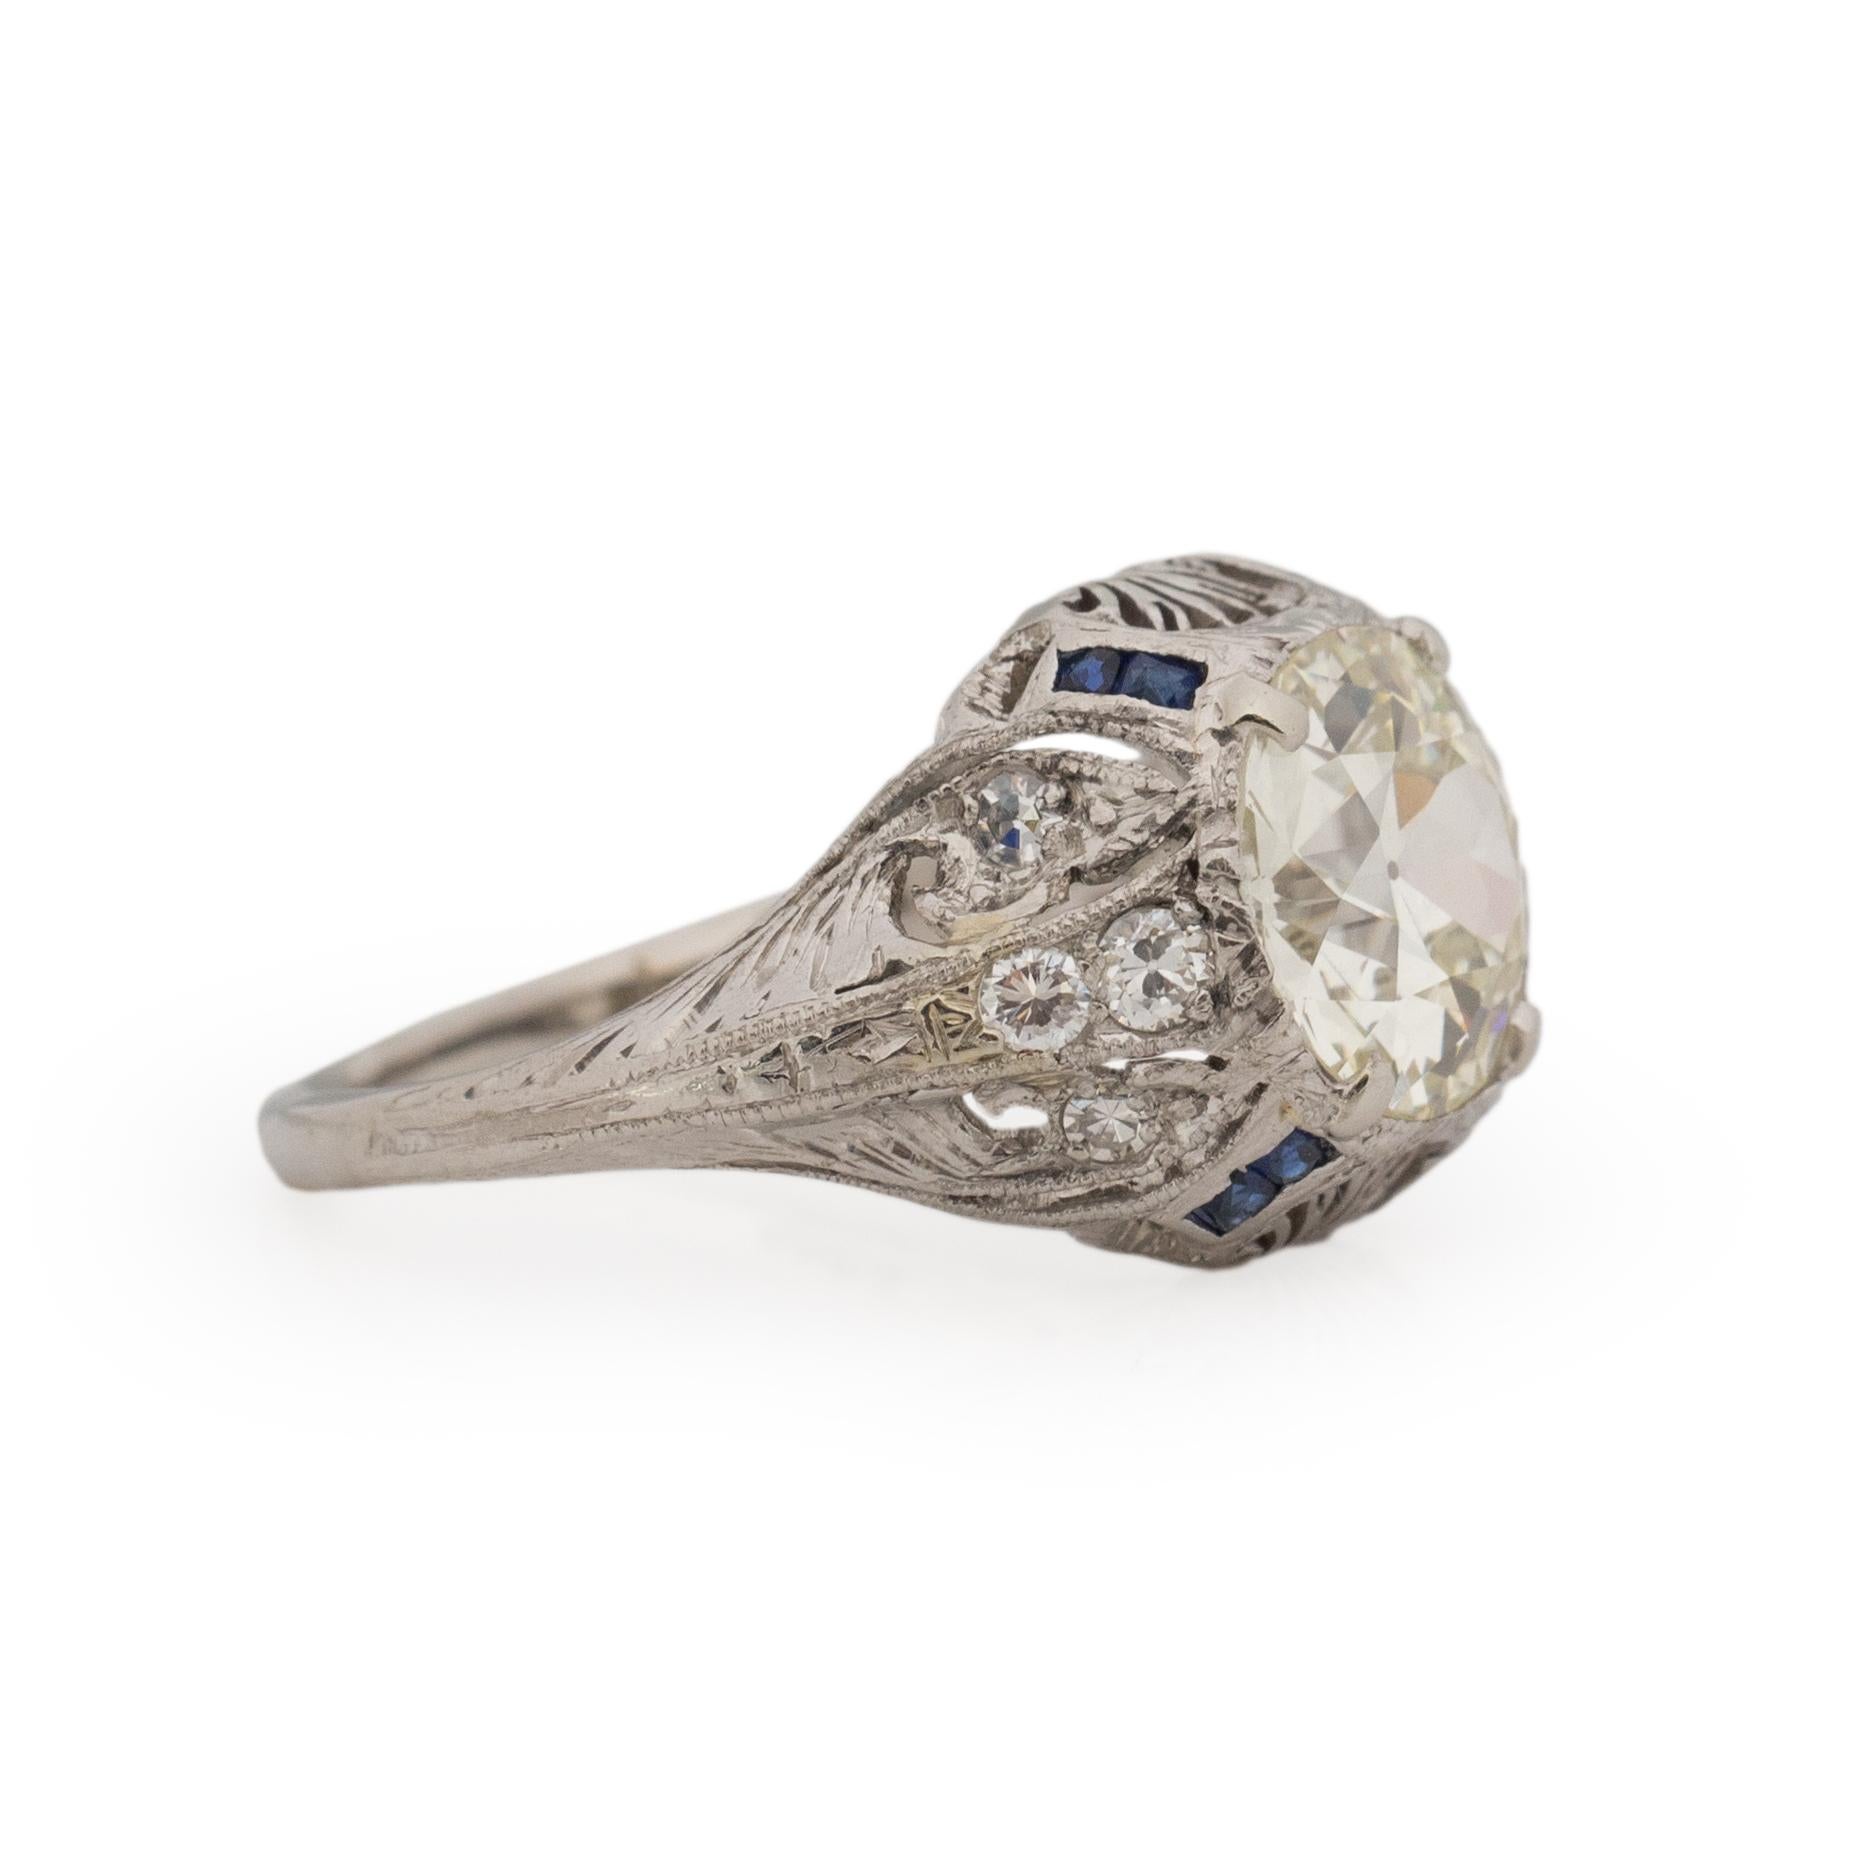 This Art Deco piece is right in between the Art Deco and Edwardian Era. Crafted in platinum the shanks support effortless organic engraving accompanied by filigree open work. Along the cathedral shanks are diamond accents that add just the right